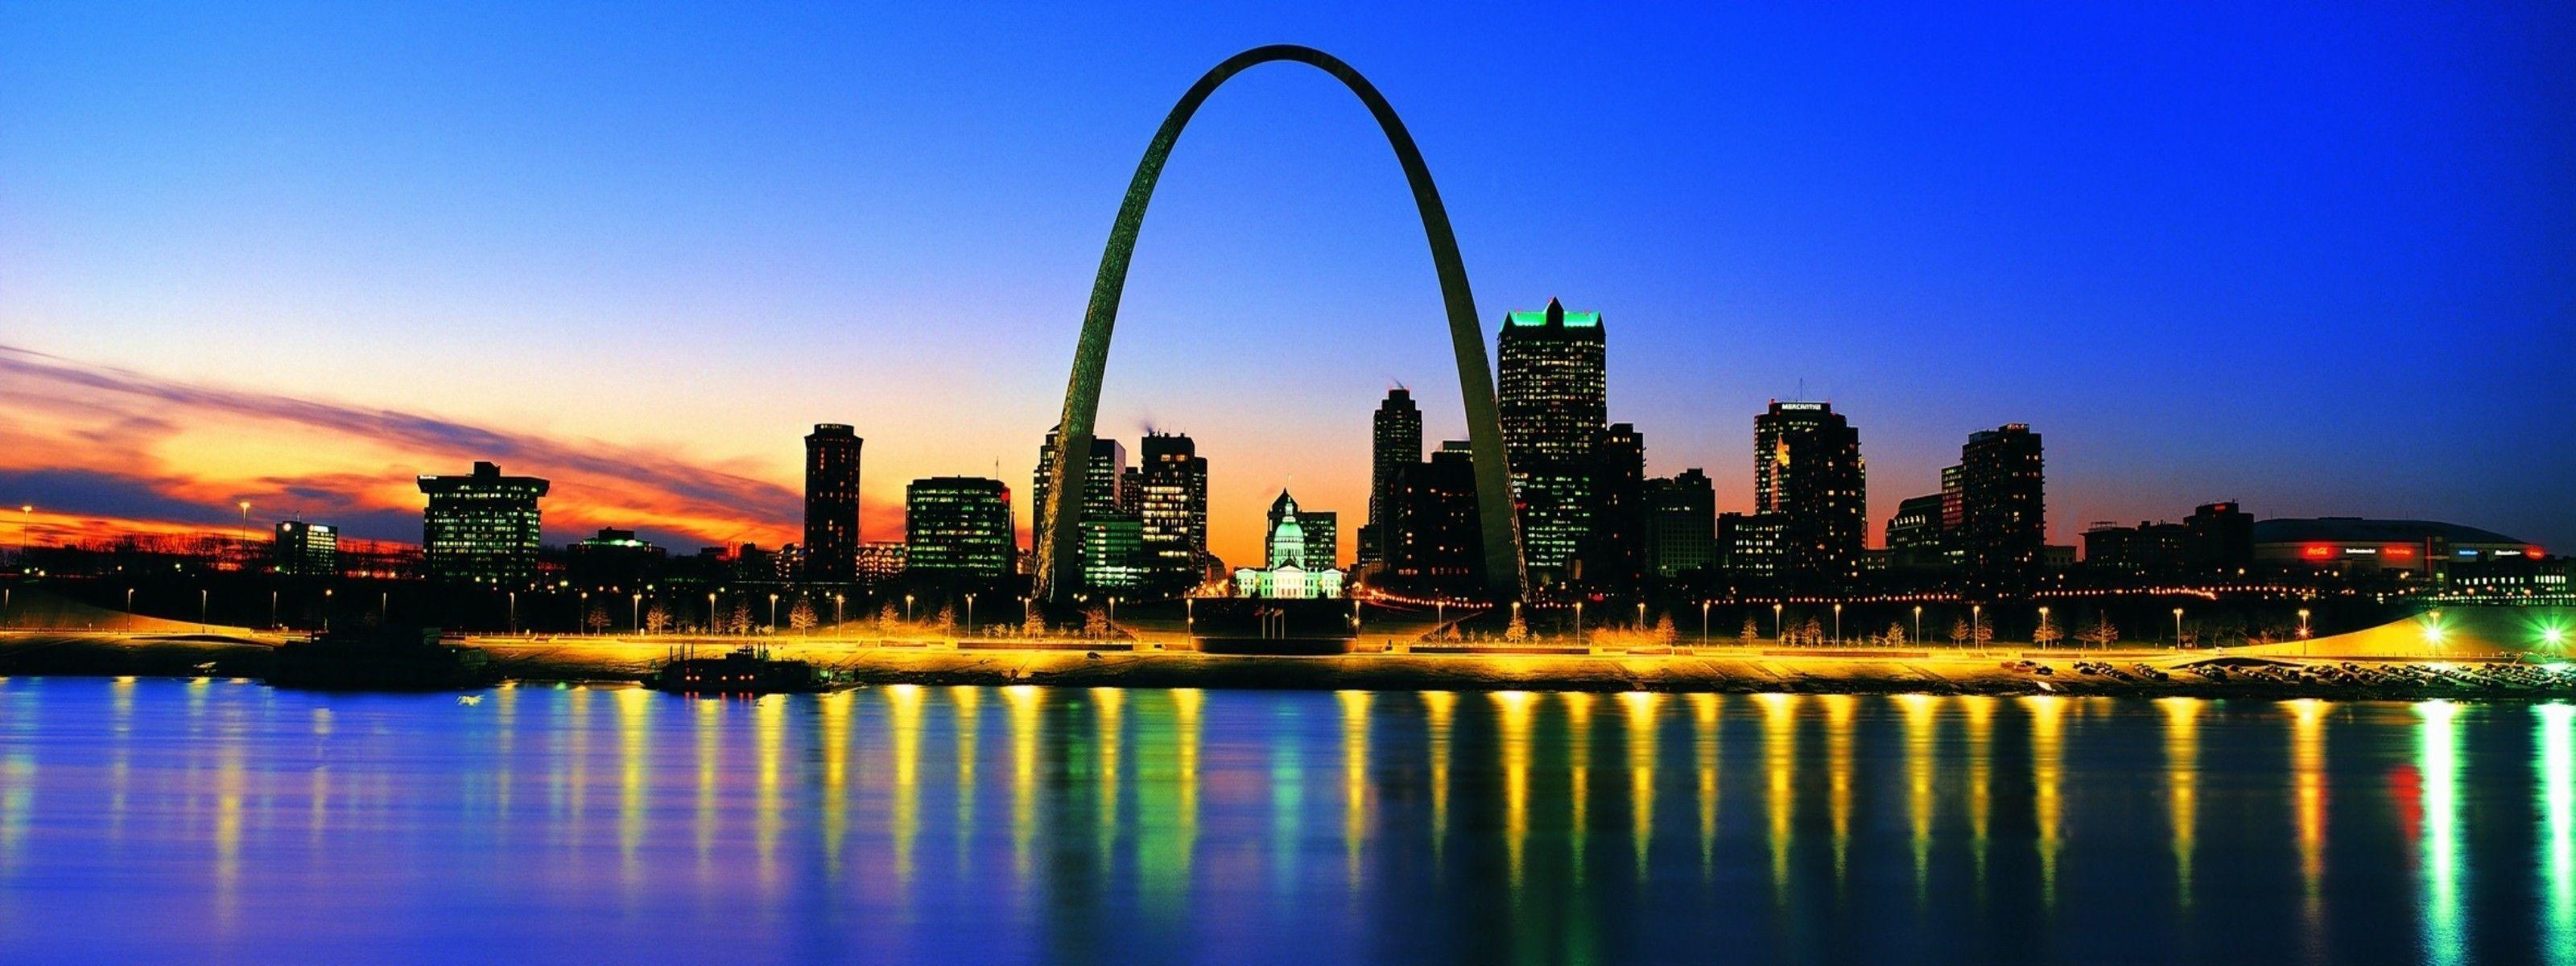 The Gateway Arch In St